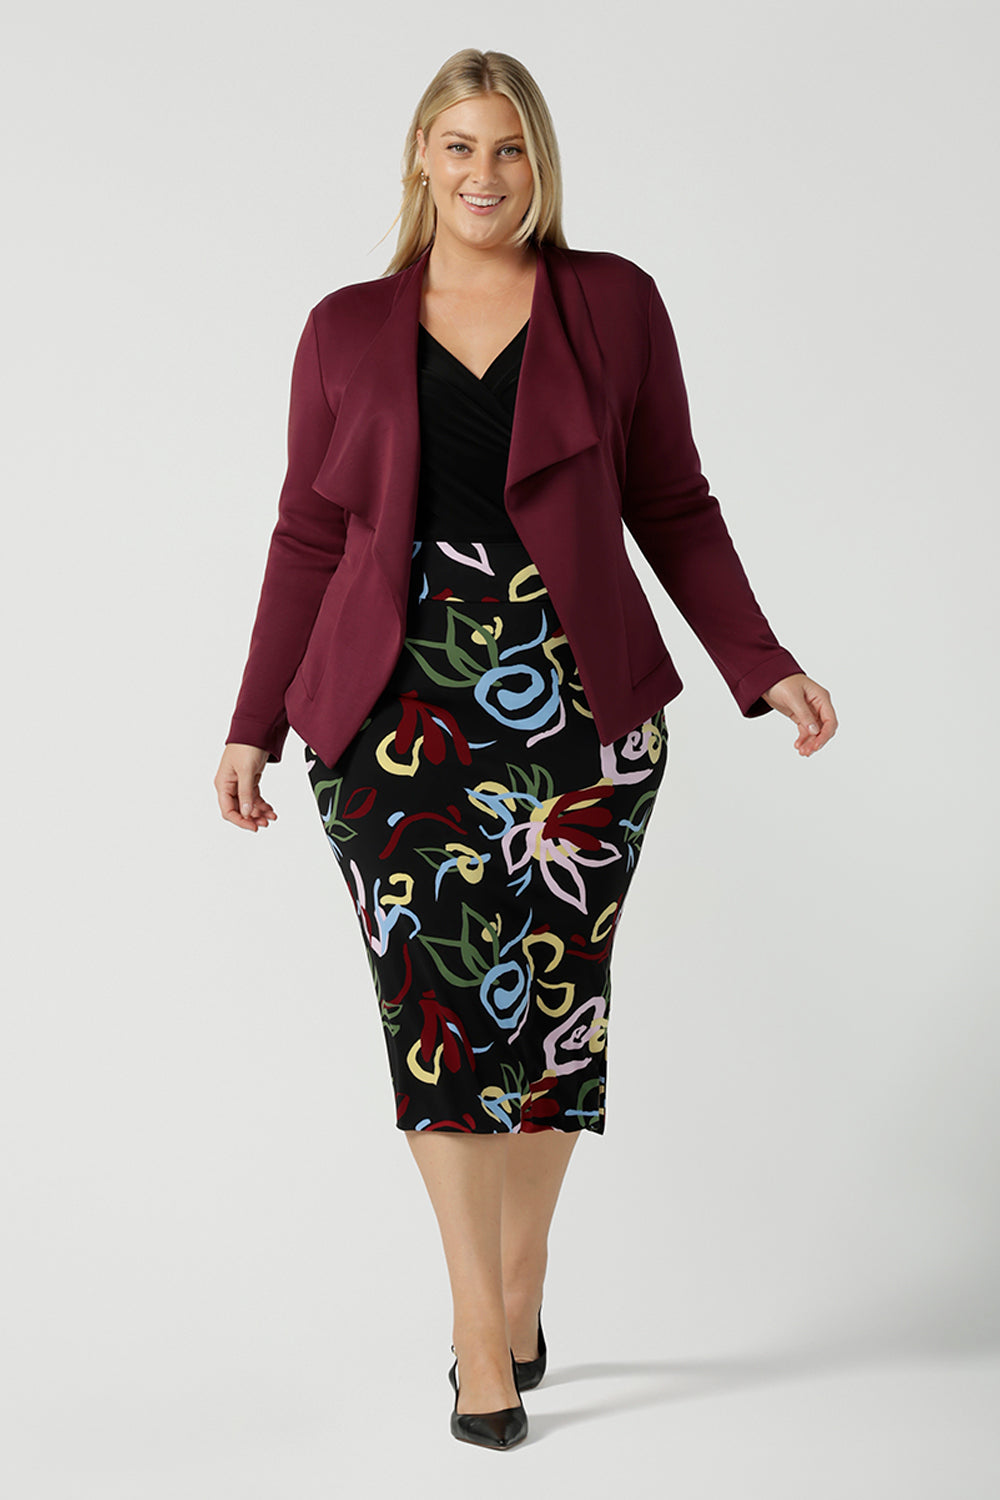 A size 18 woman wears the Lyndon Jacket Midi Skirt back with the Lyndon Jacket in wine.  Made in Australia for women size 8 - 24.